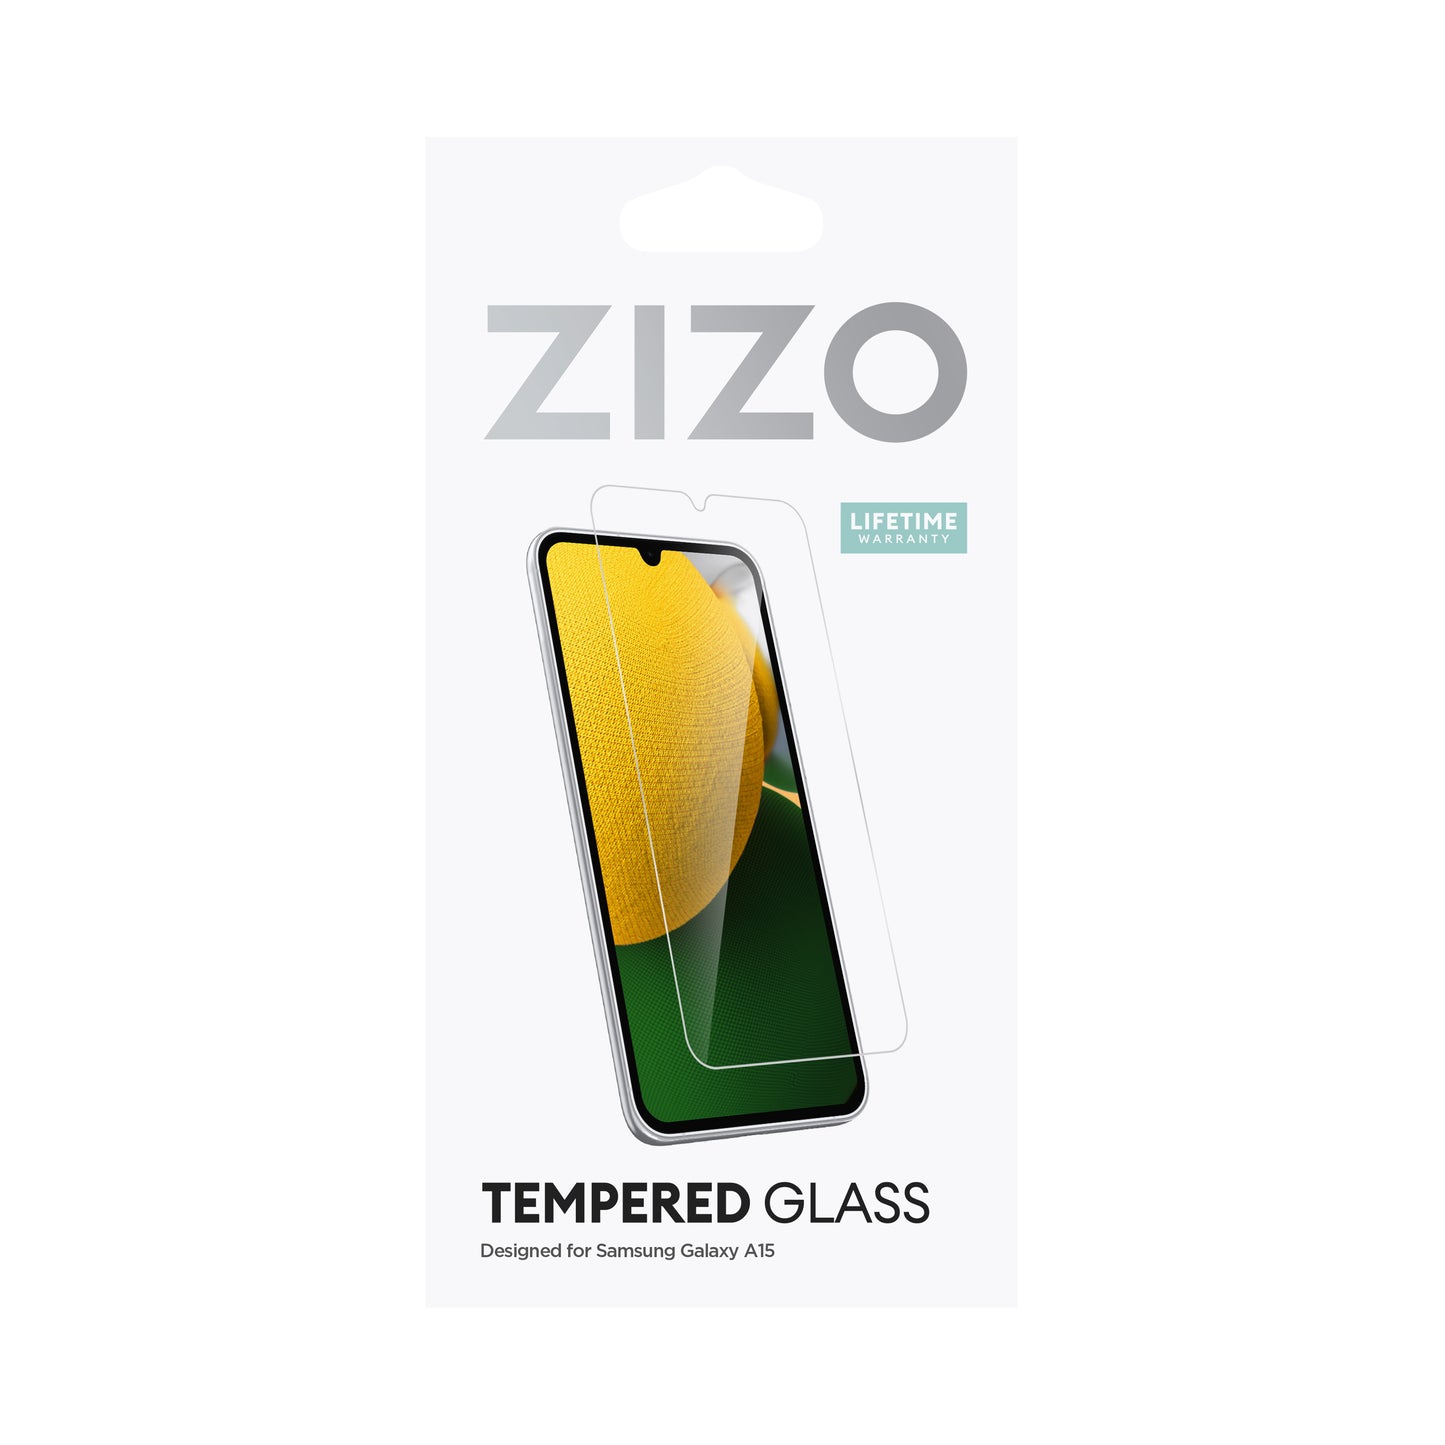 ZIZO TEMPERED GLASS Screen Protector for Galaxy A15 5G - Clear